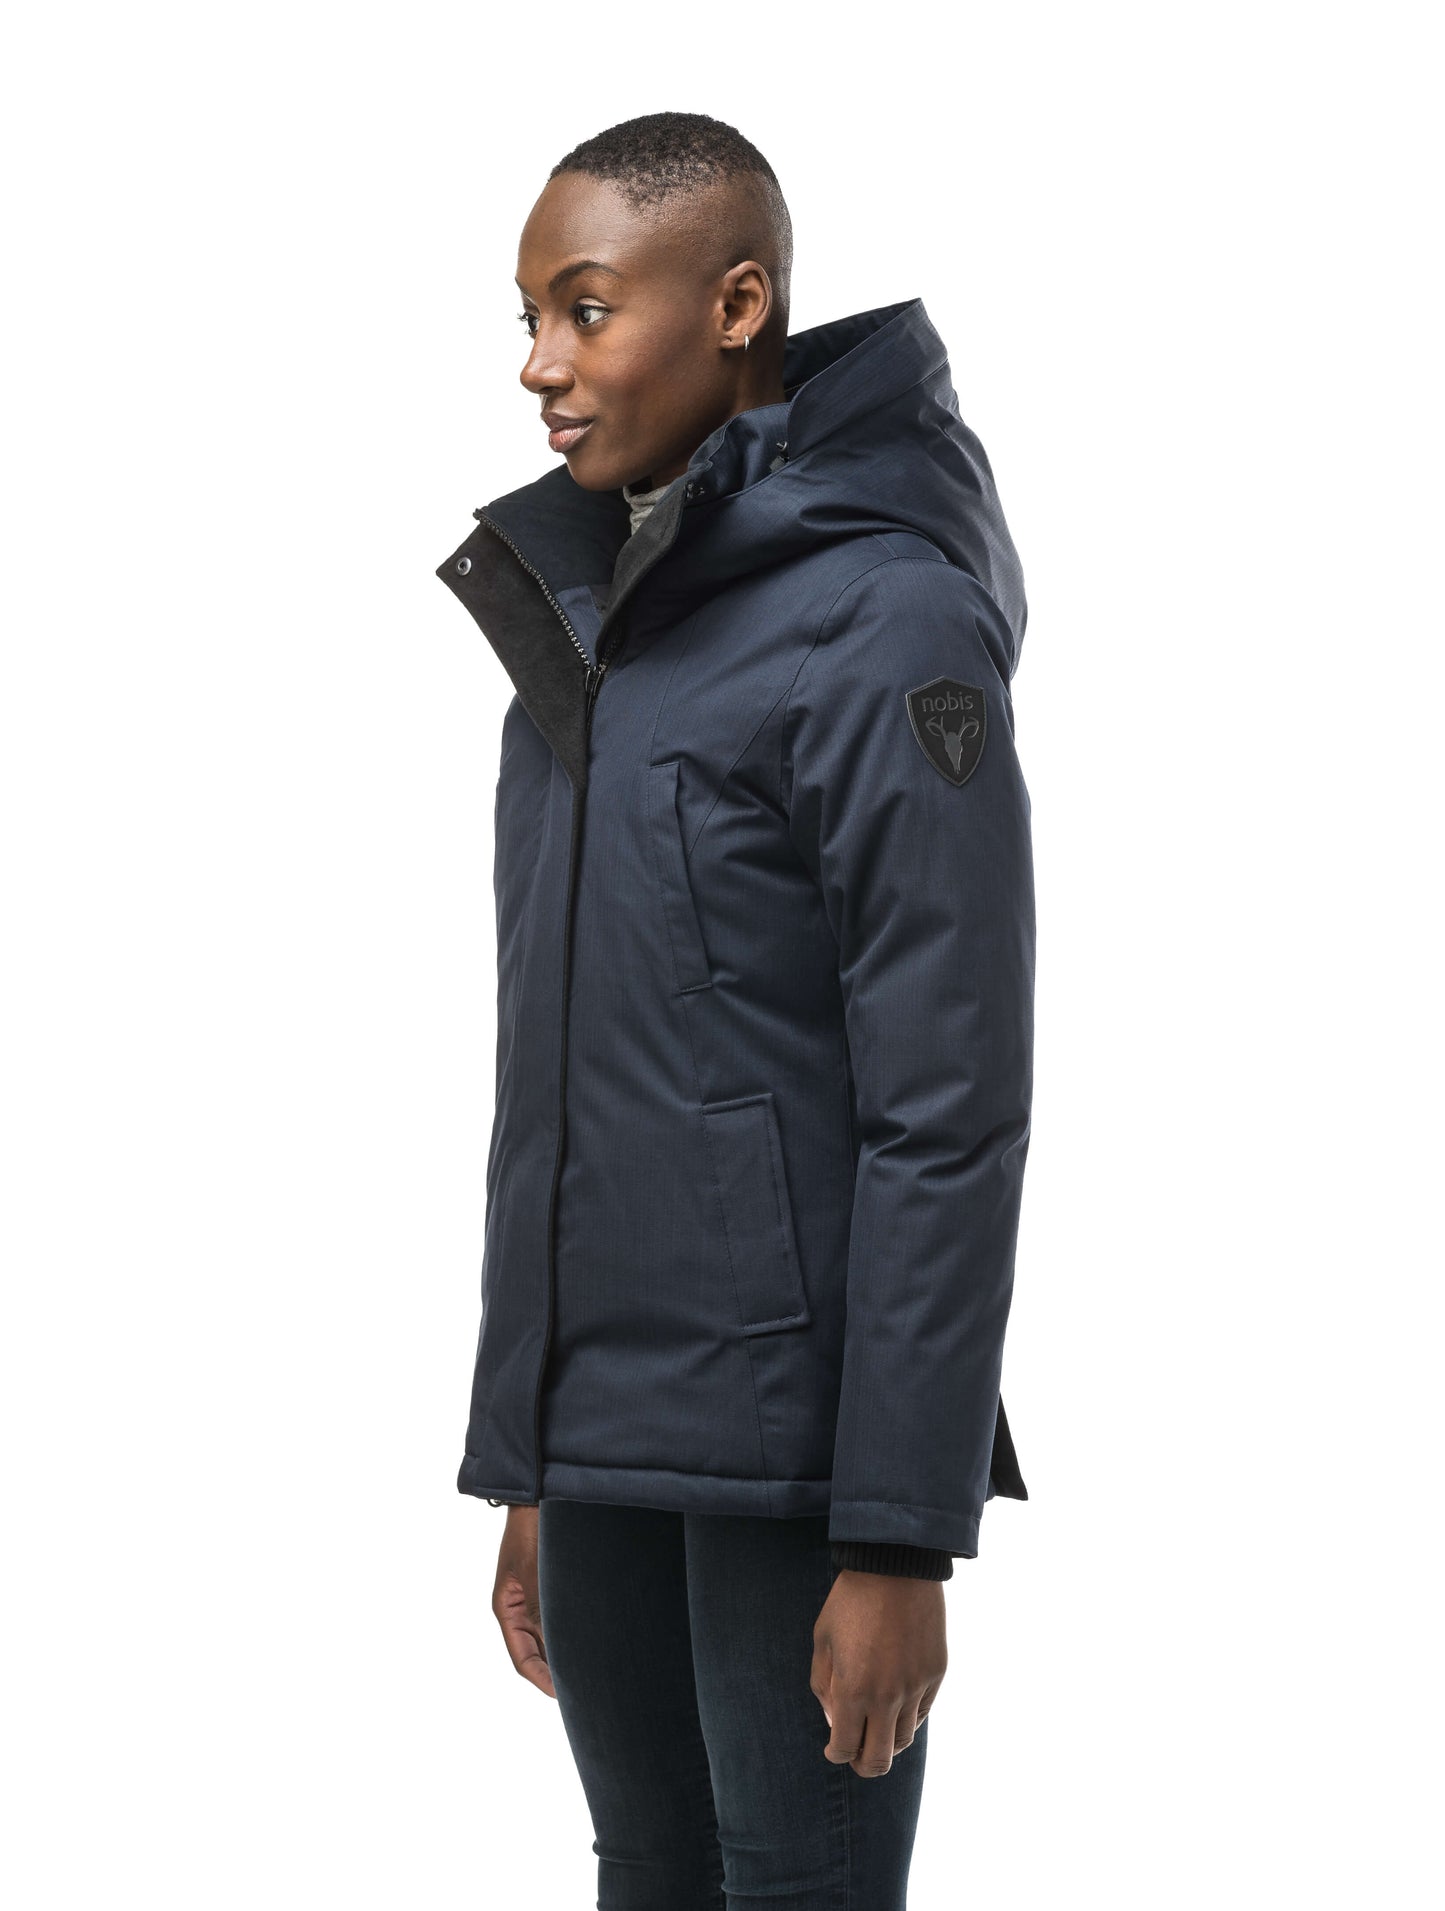 Women's hip length down filled parka with non-removable hood in CH Navy